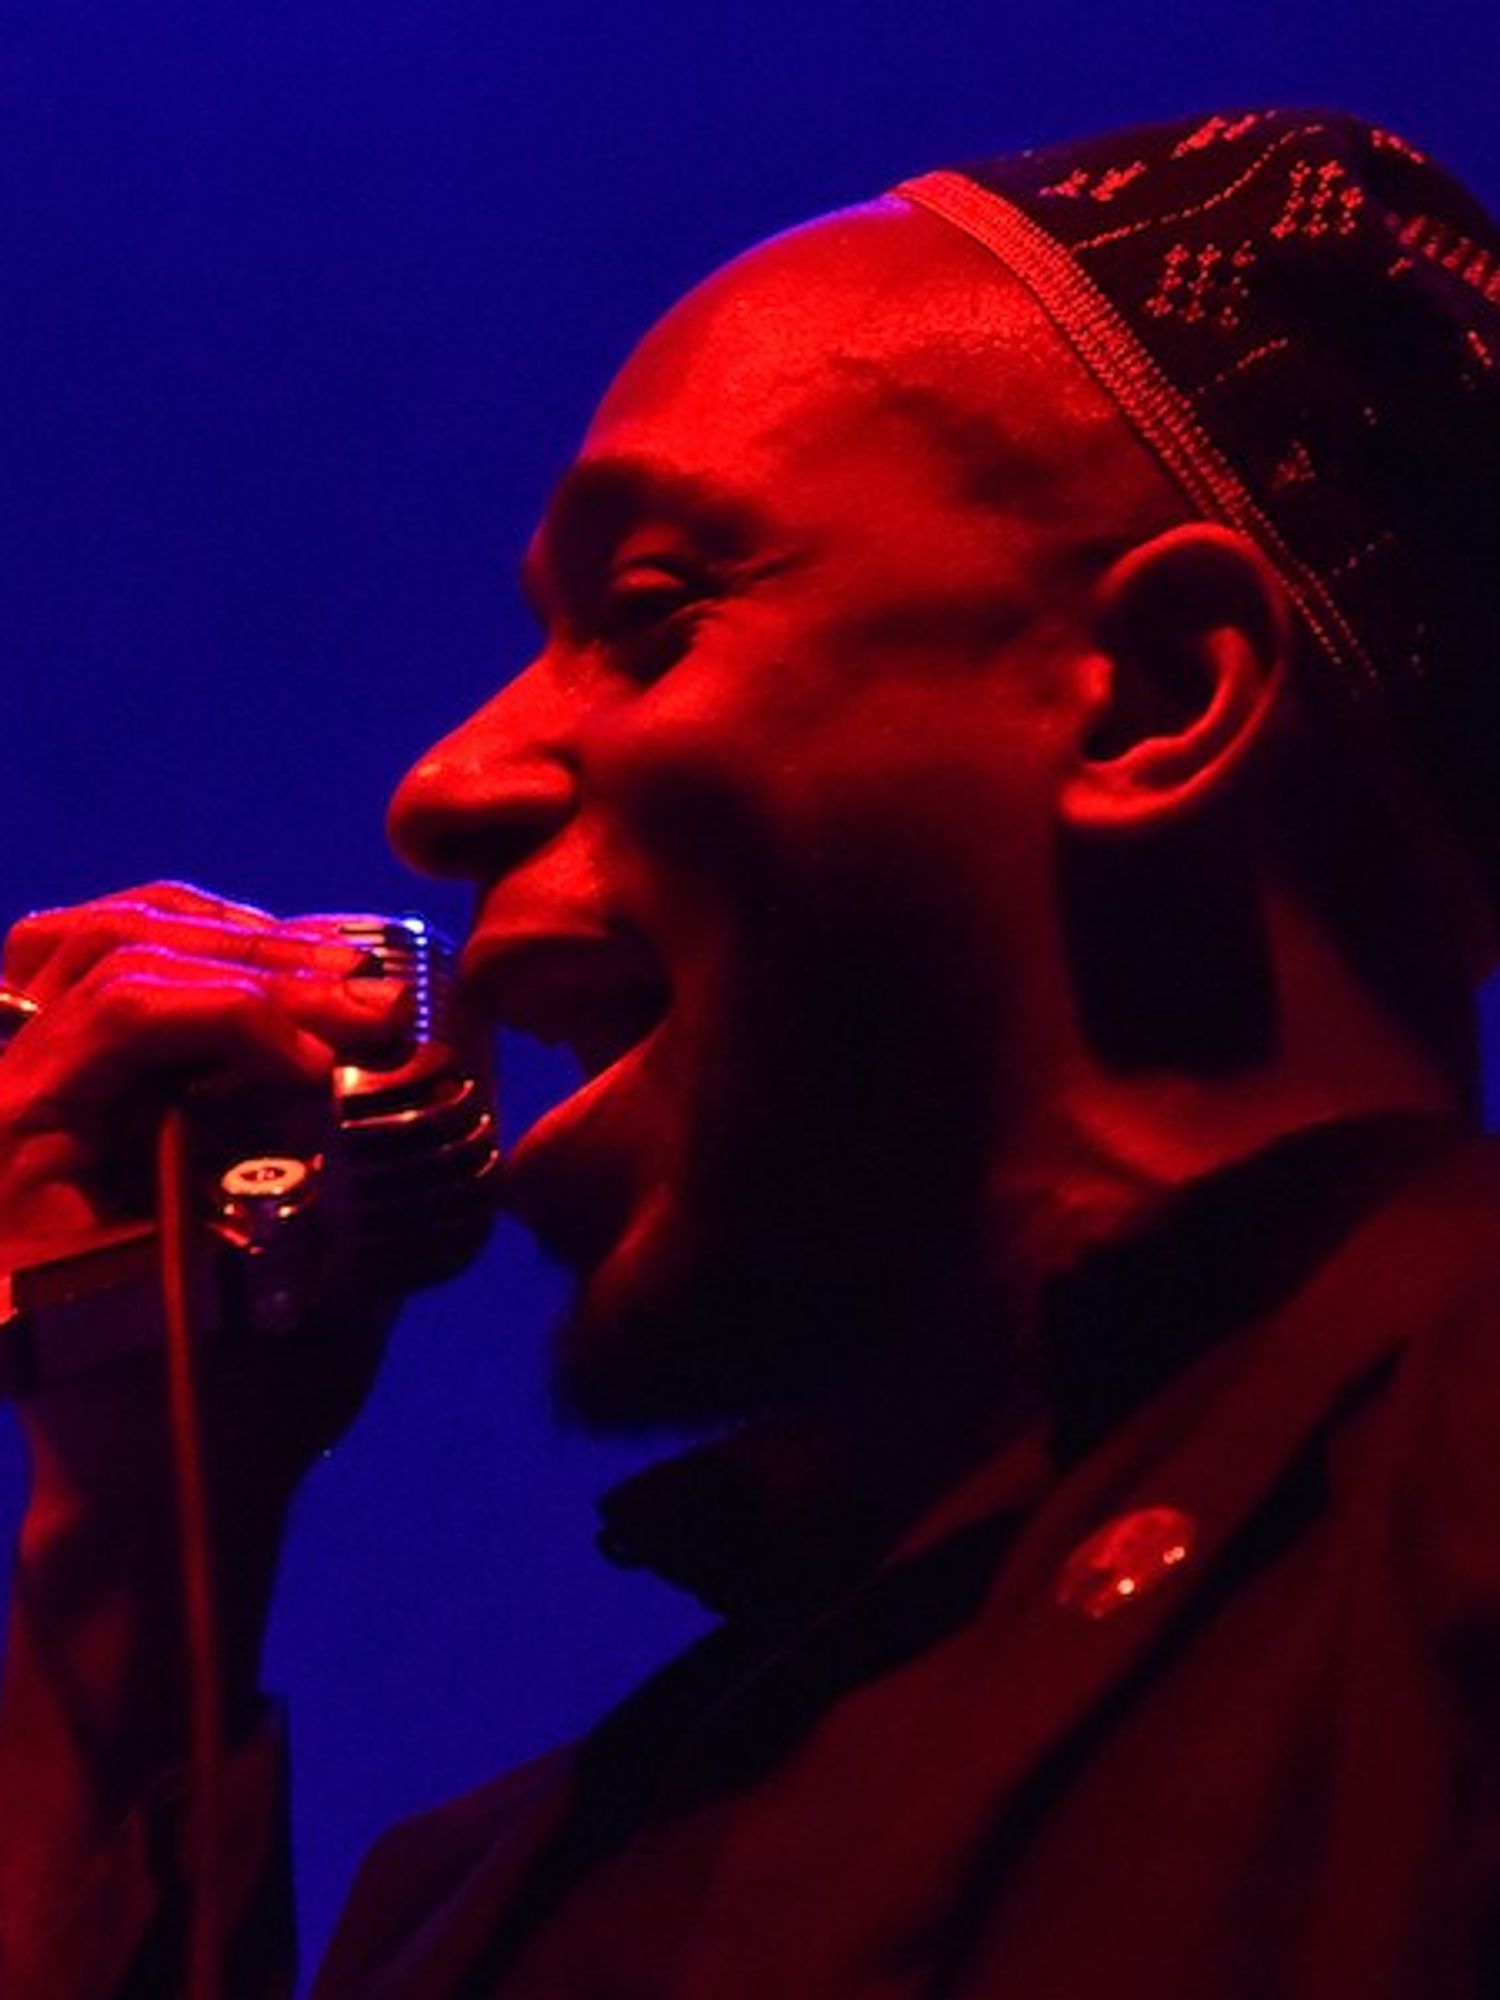 Yasiin Bey To Play Jazz Legend Thelonious Monk In Upcoming Biopic